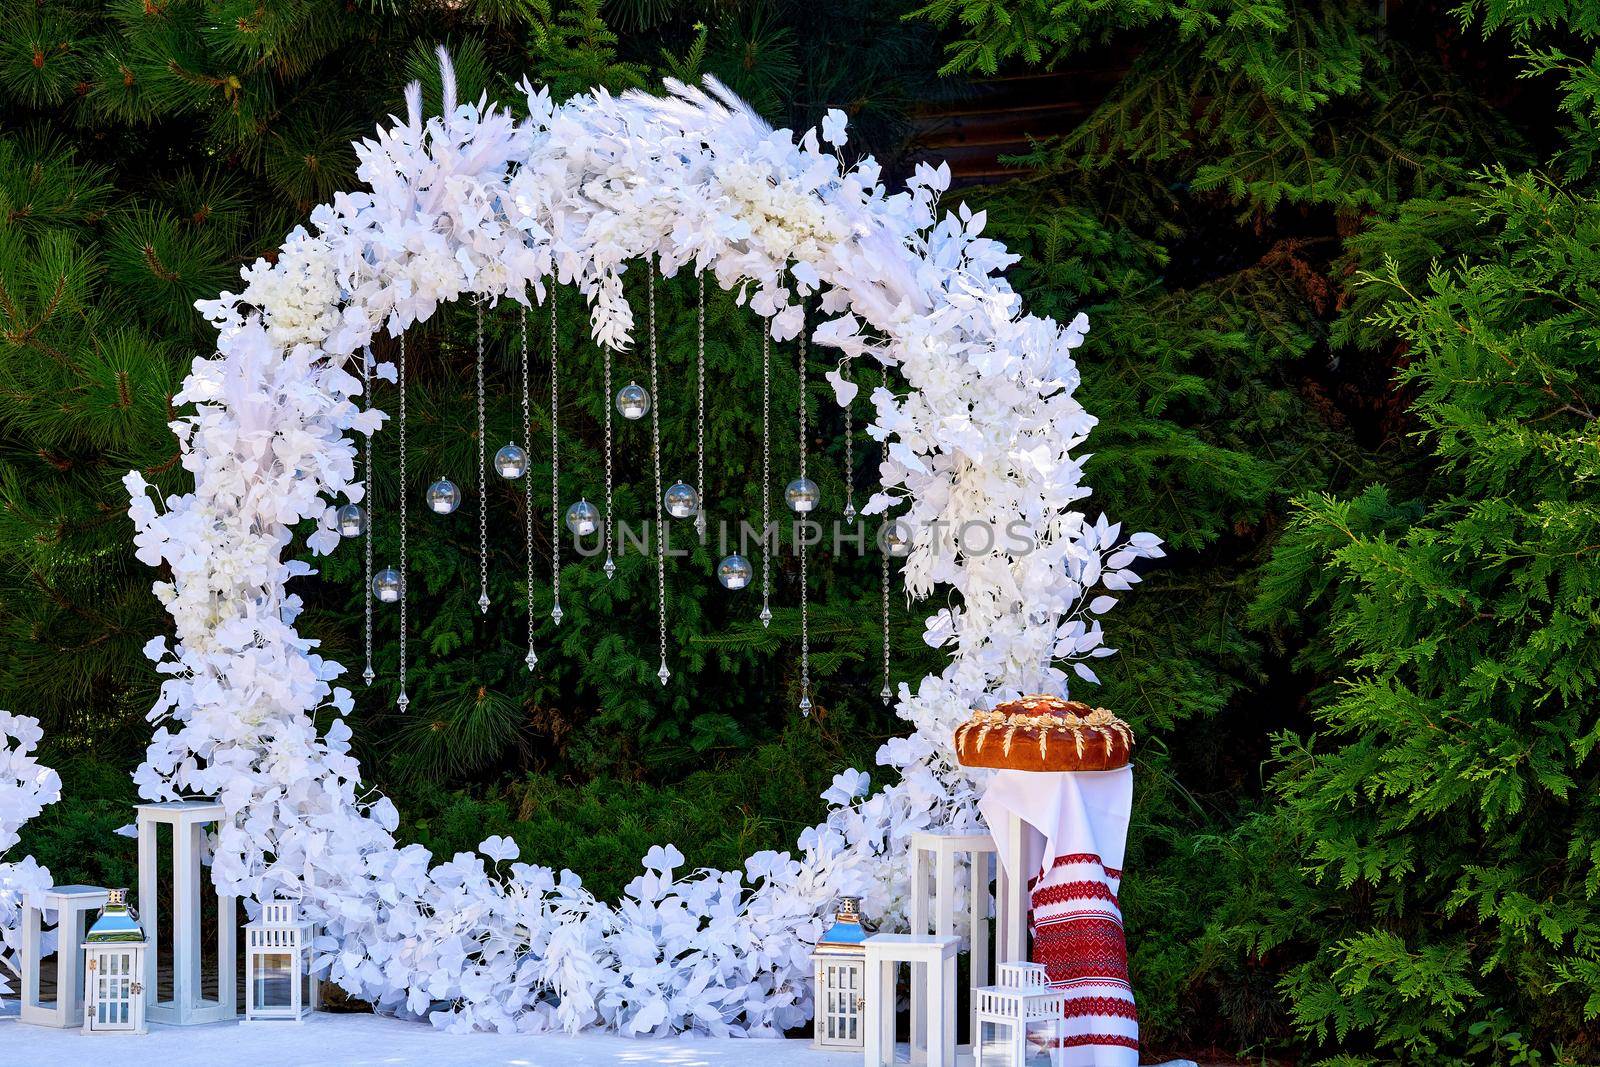 Snowy white wedding festive arch for a meeting of the newlyweds by jovani68